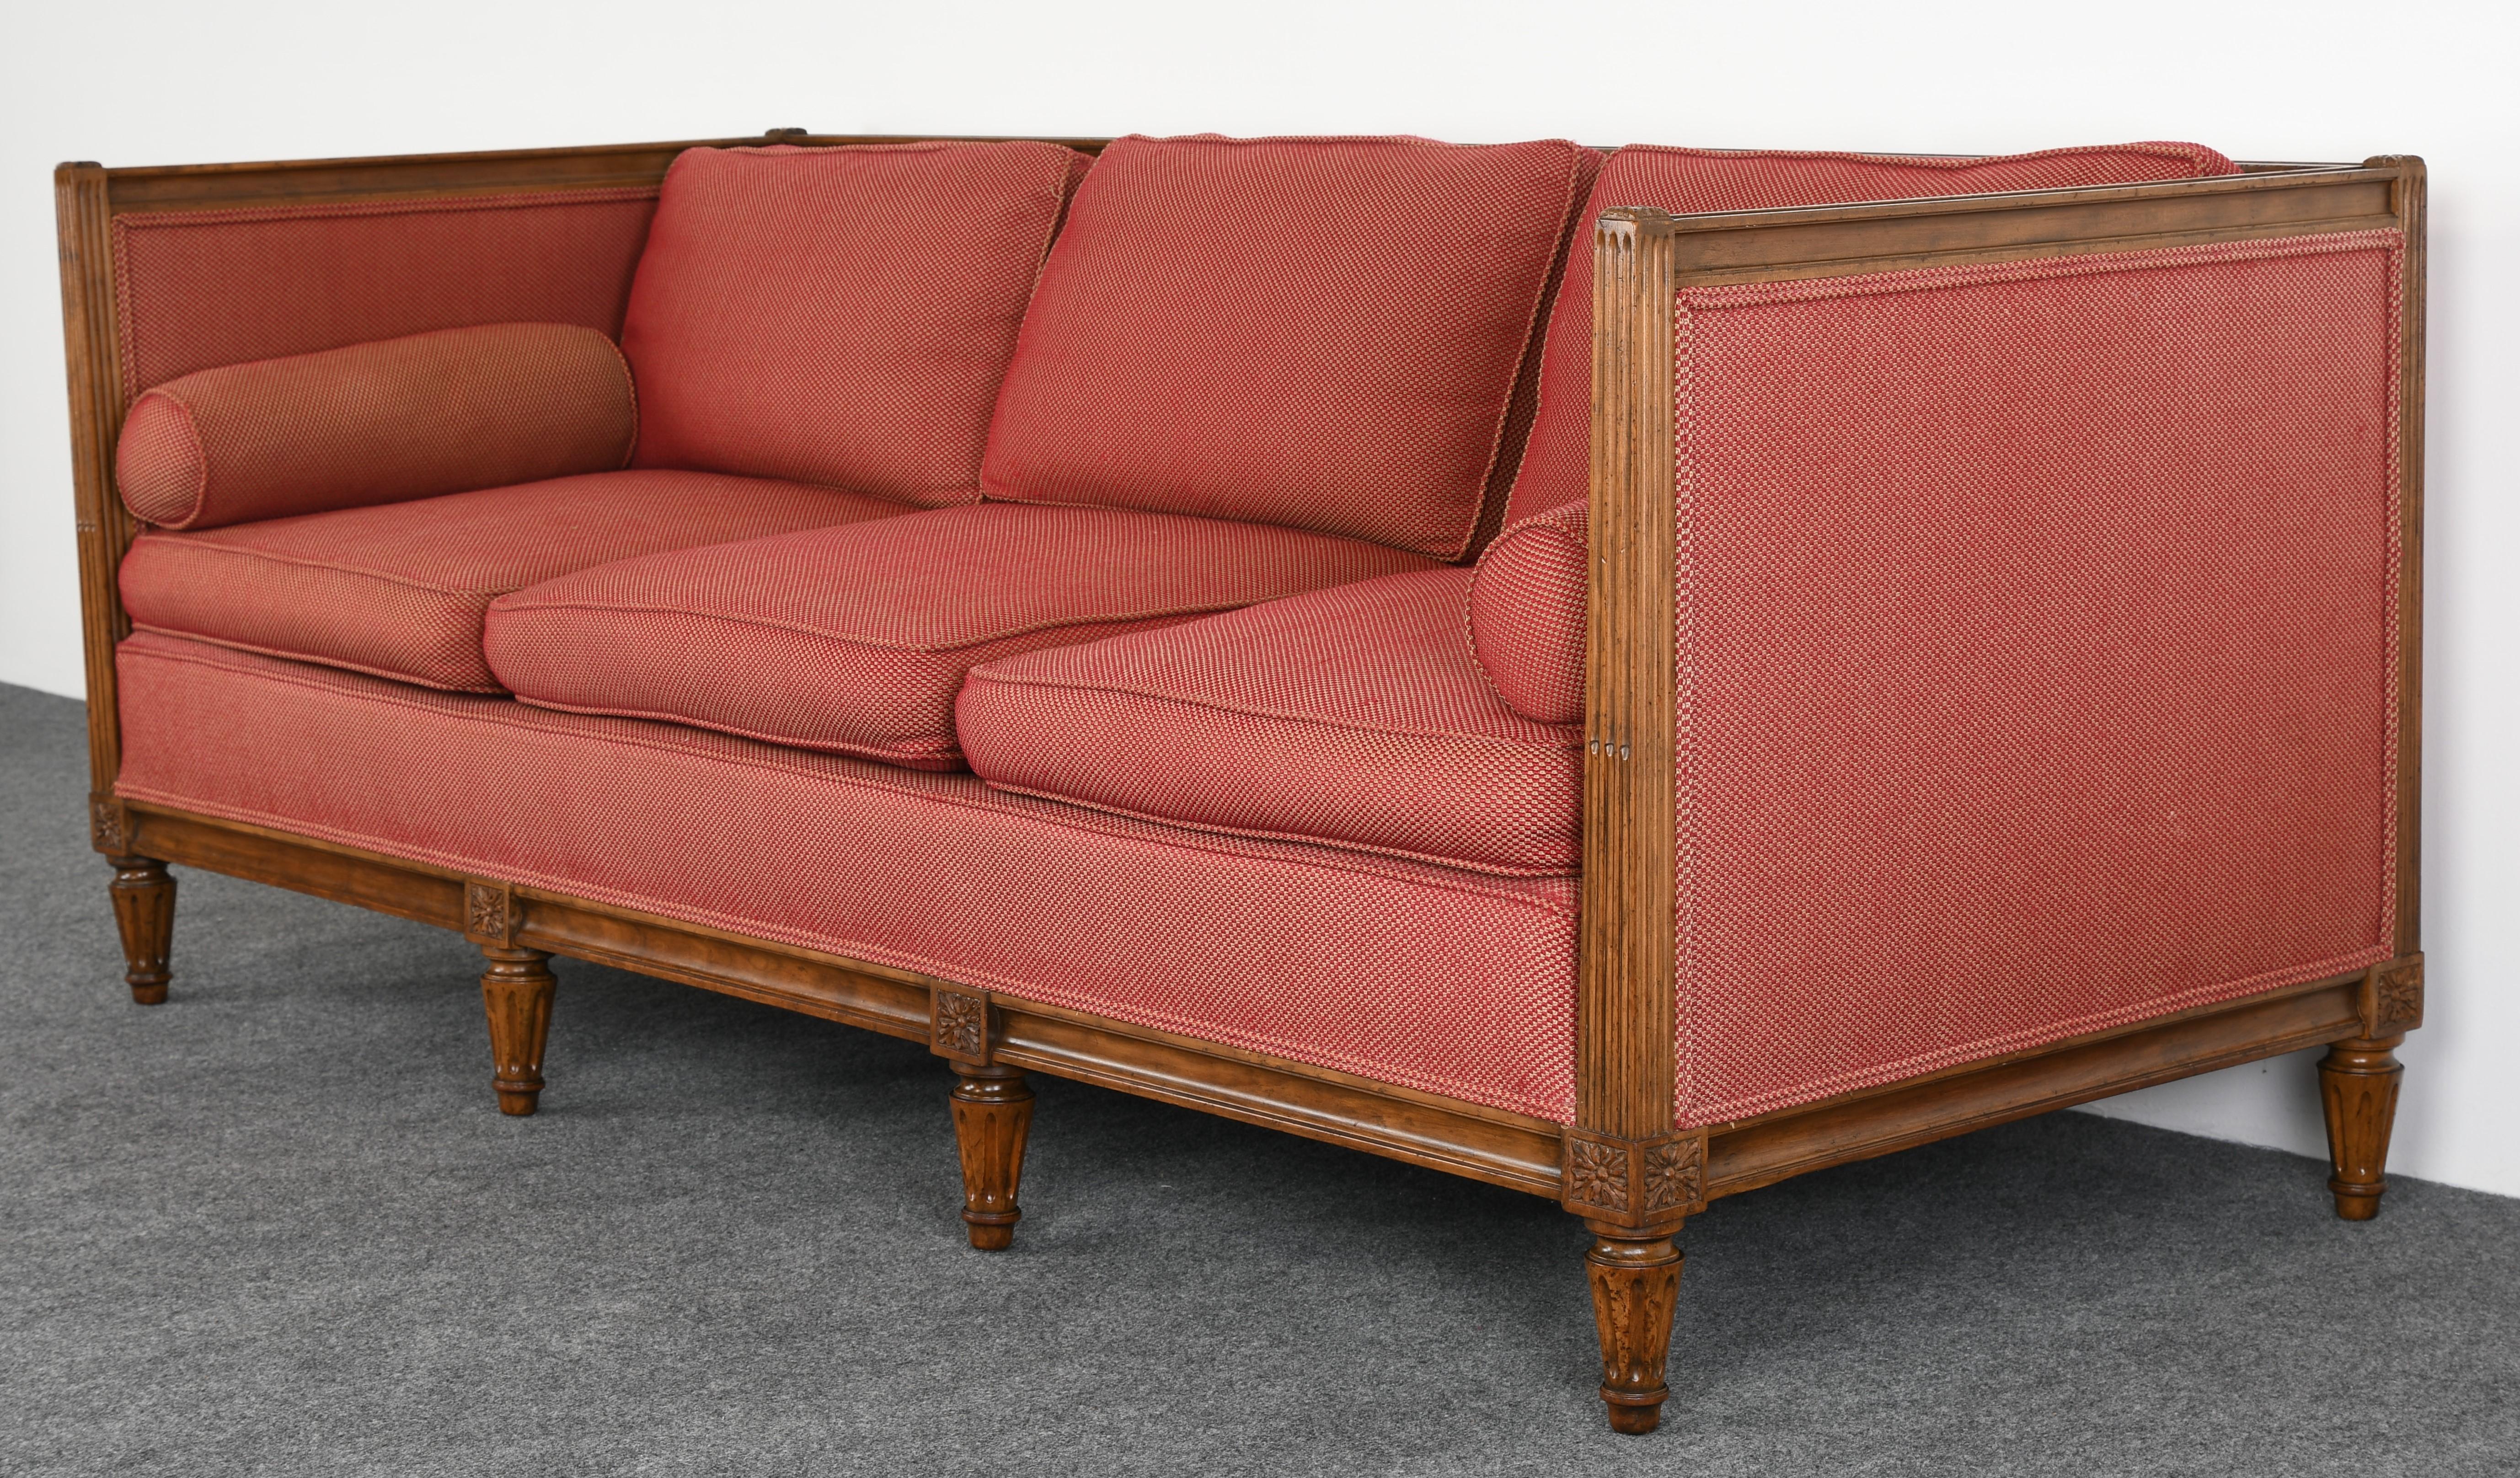 A stately Louis XVI style sofa by Baker Furniture Company with walnut frame and upholstery. New upholstery suggested, however, can be temporarily used as found. The fabric is in overall good condition with some spots. Structurally sound. Originally